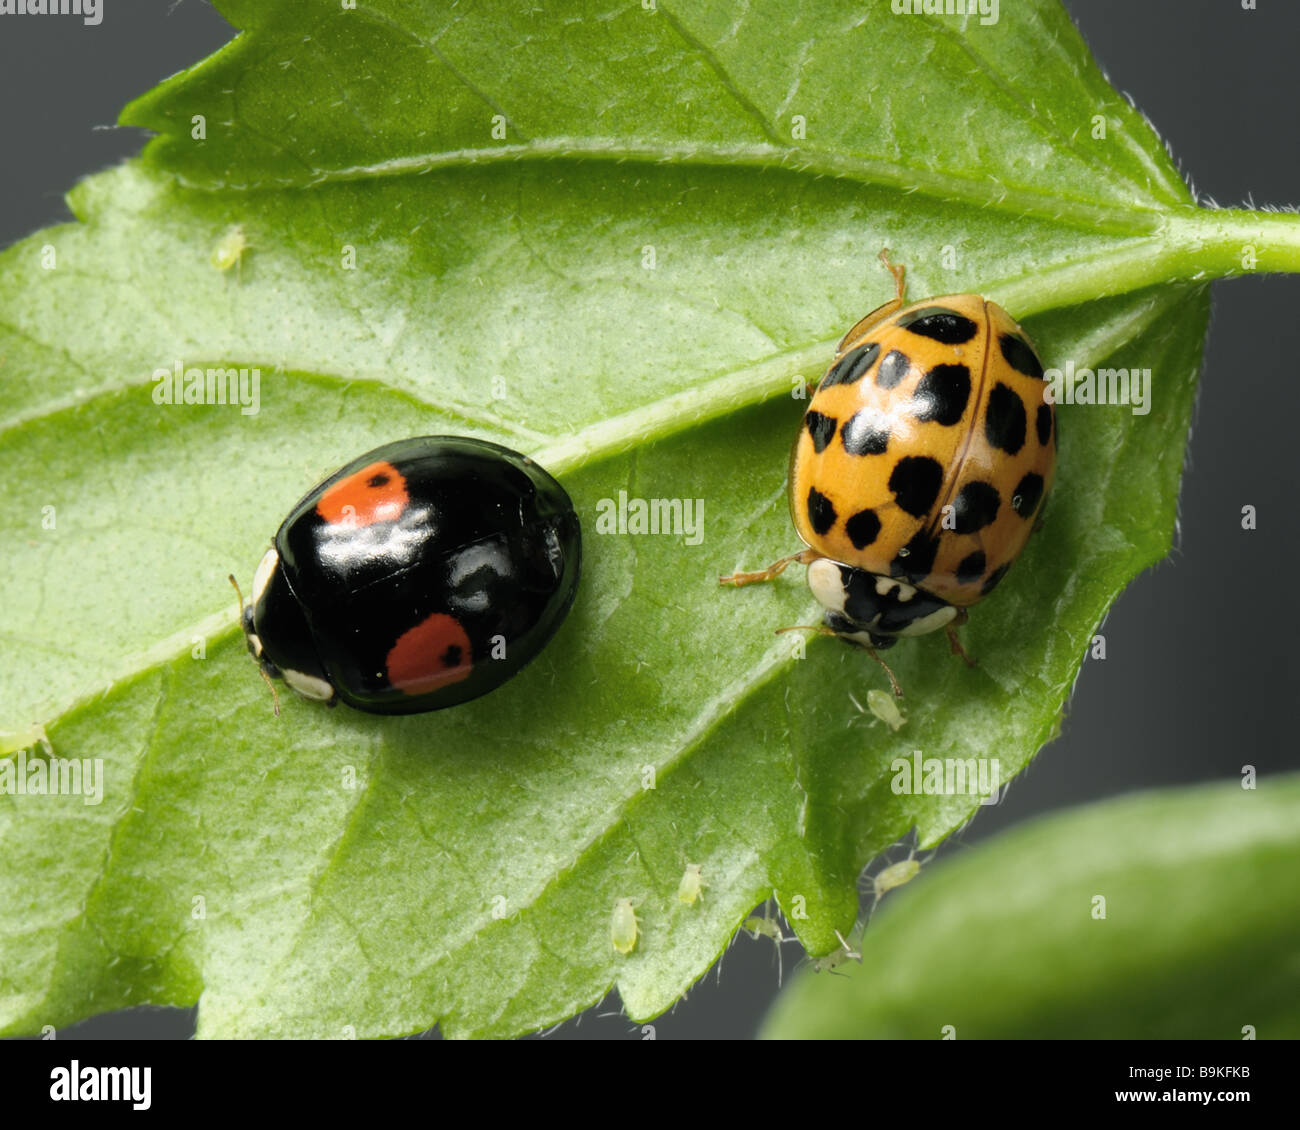 Harlequin ladybird Harmonia axyridis two colour variations on a leaf with aphids Stock Photo